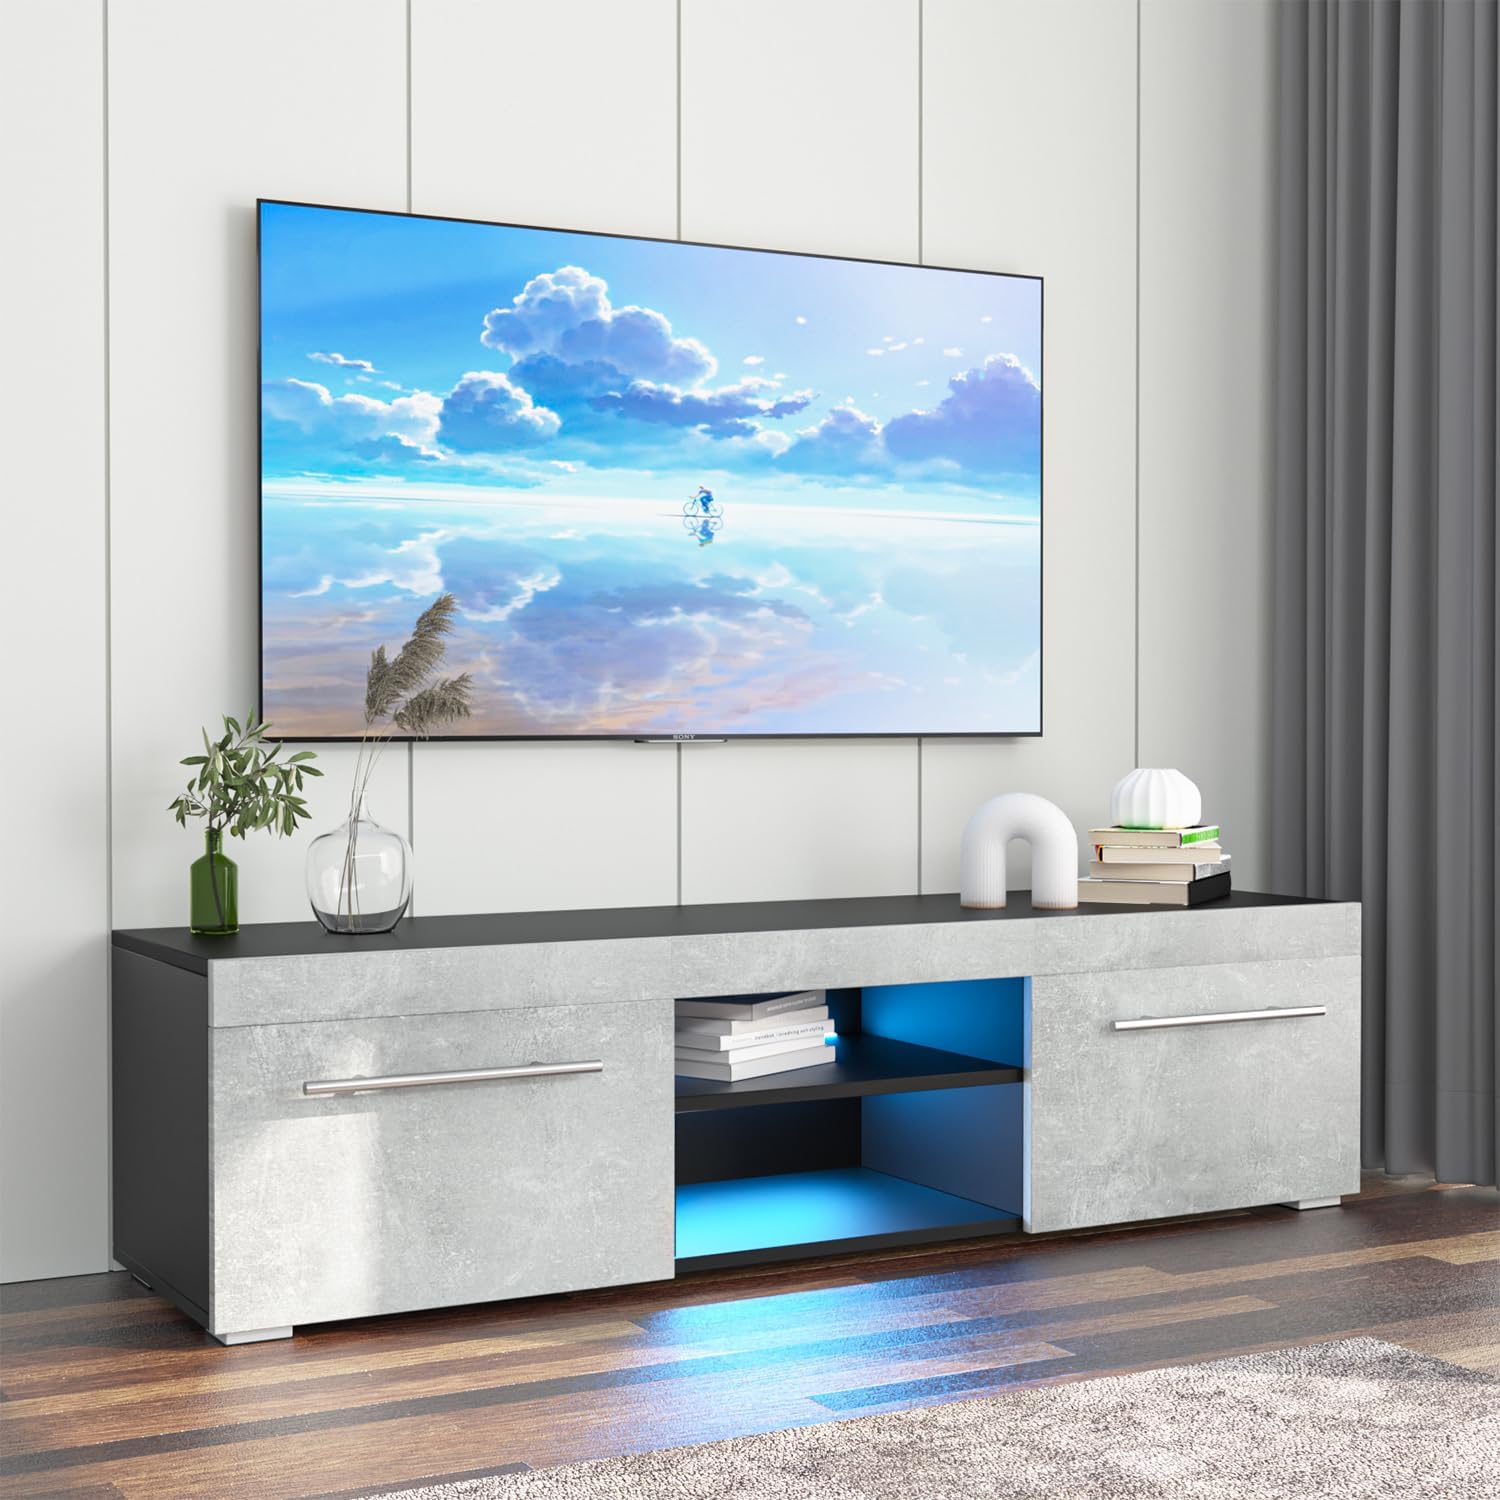 HOMMPA TV Stand with LED Lights for TVs up to 59 inch Grey Modern Television Stands LED Entertainment Center with High Gloss Drawers Storage TV Console for Living Room, Bedroom